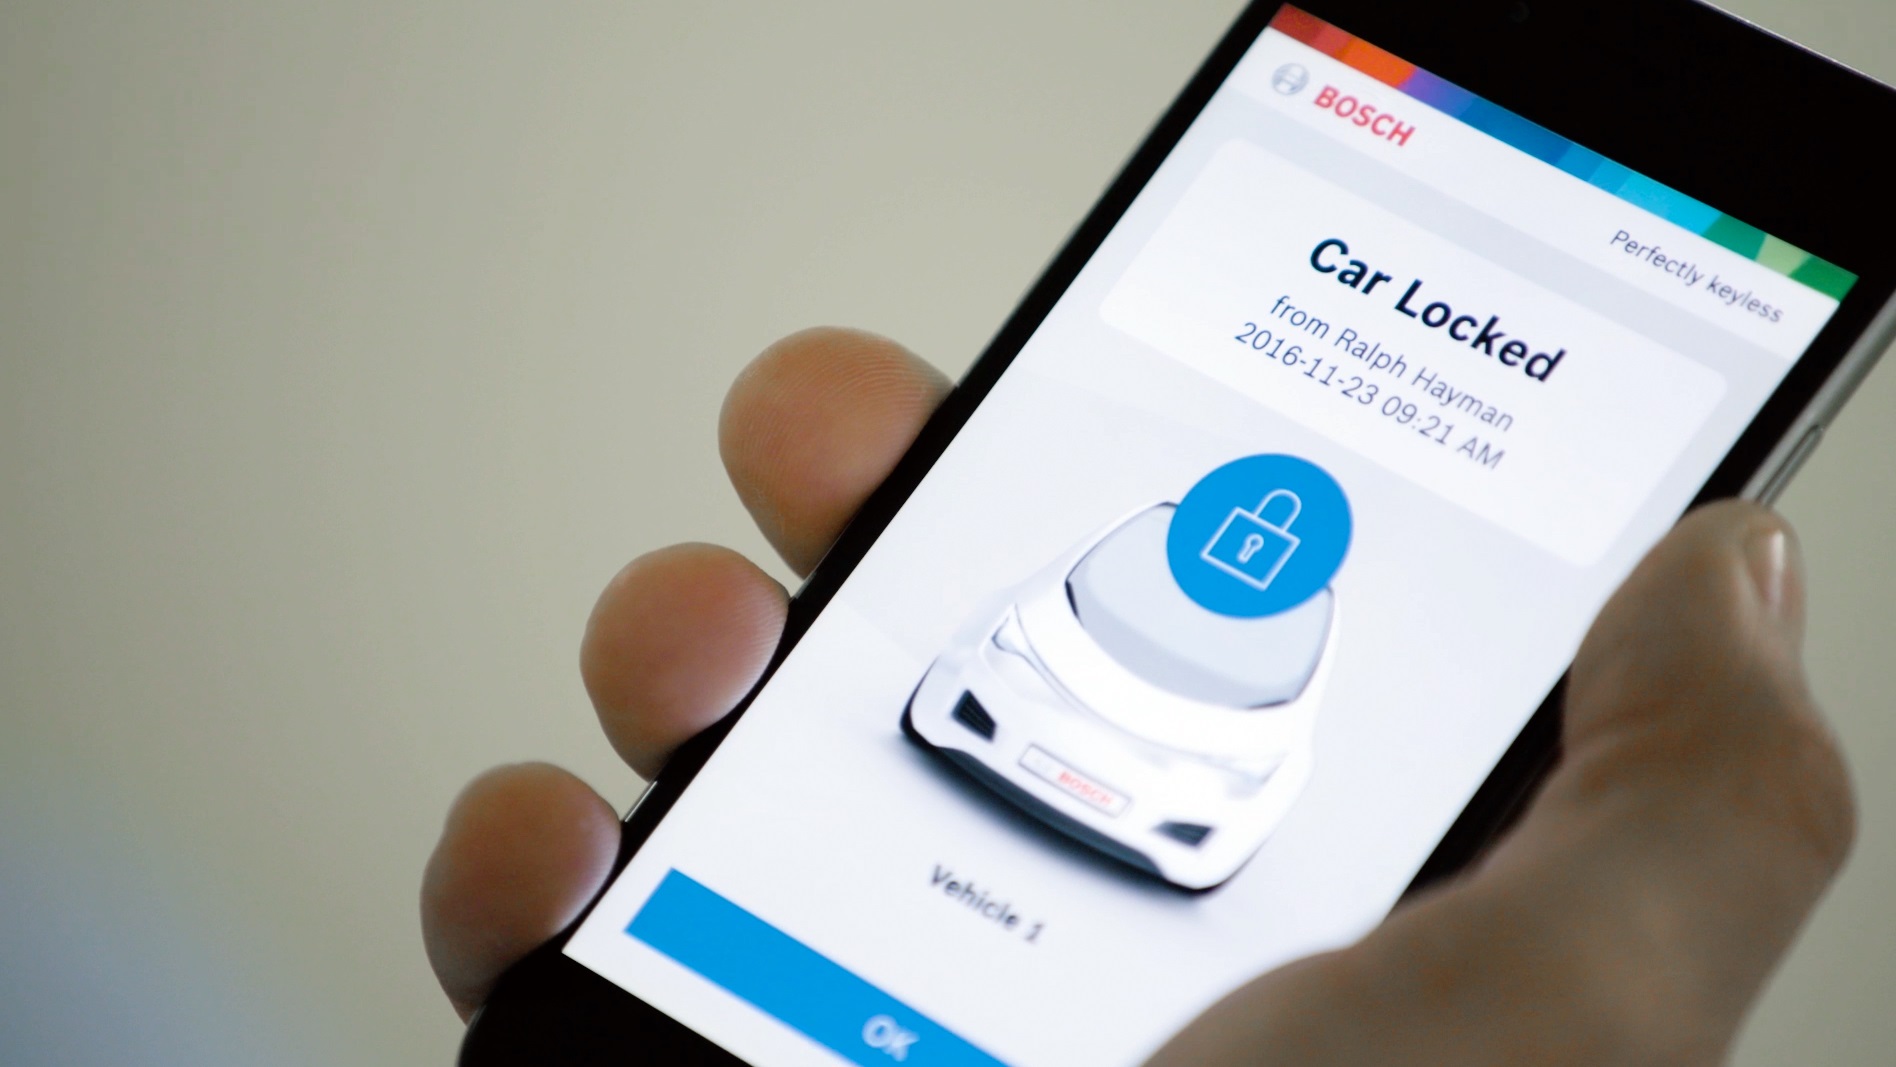 Bosch’s Perfectly Keyless turns the smartphone into a car key.